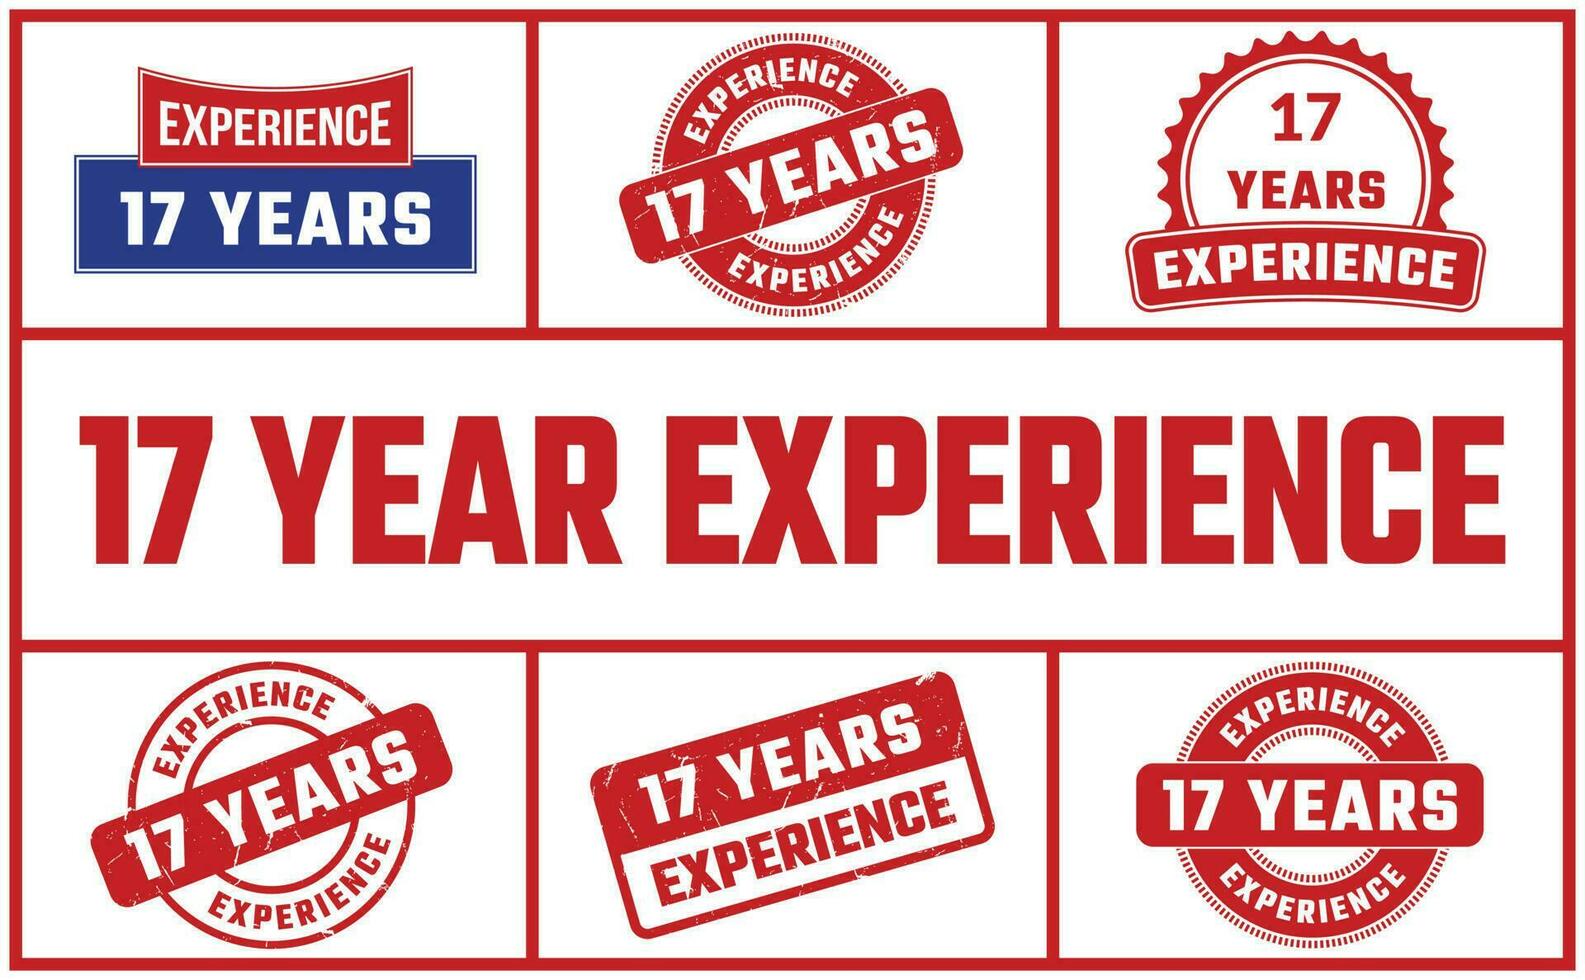 17 Years Experience Rubber Stamp Set vector